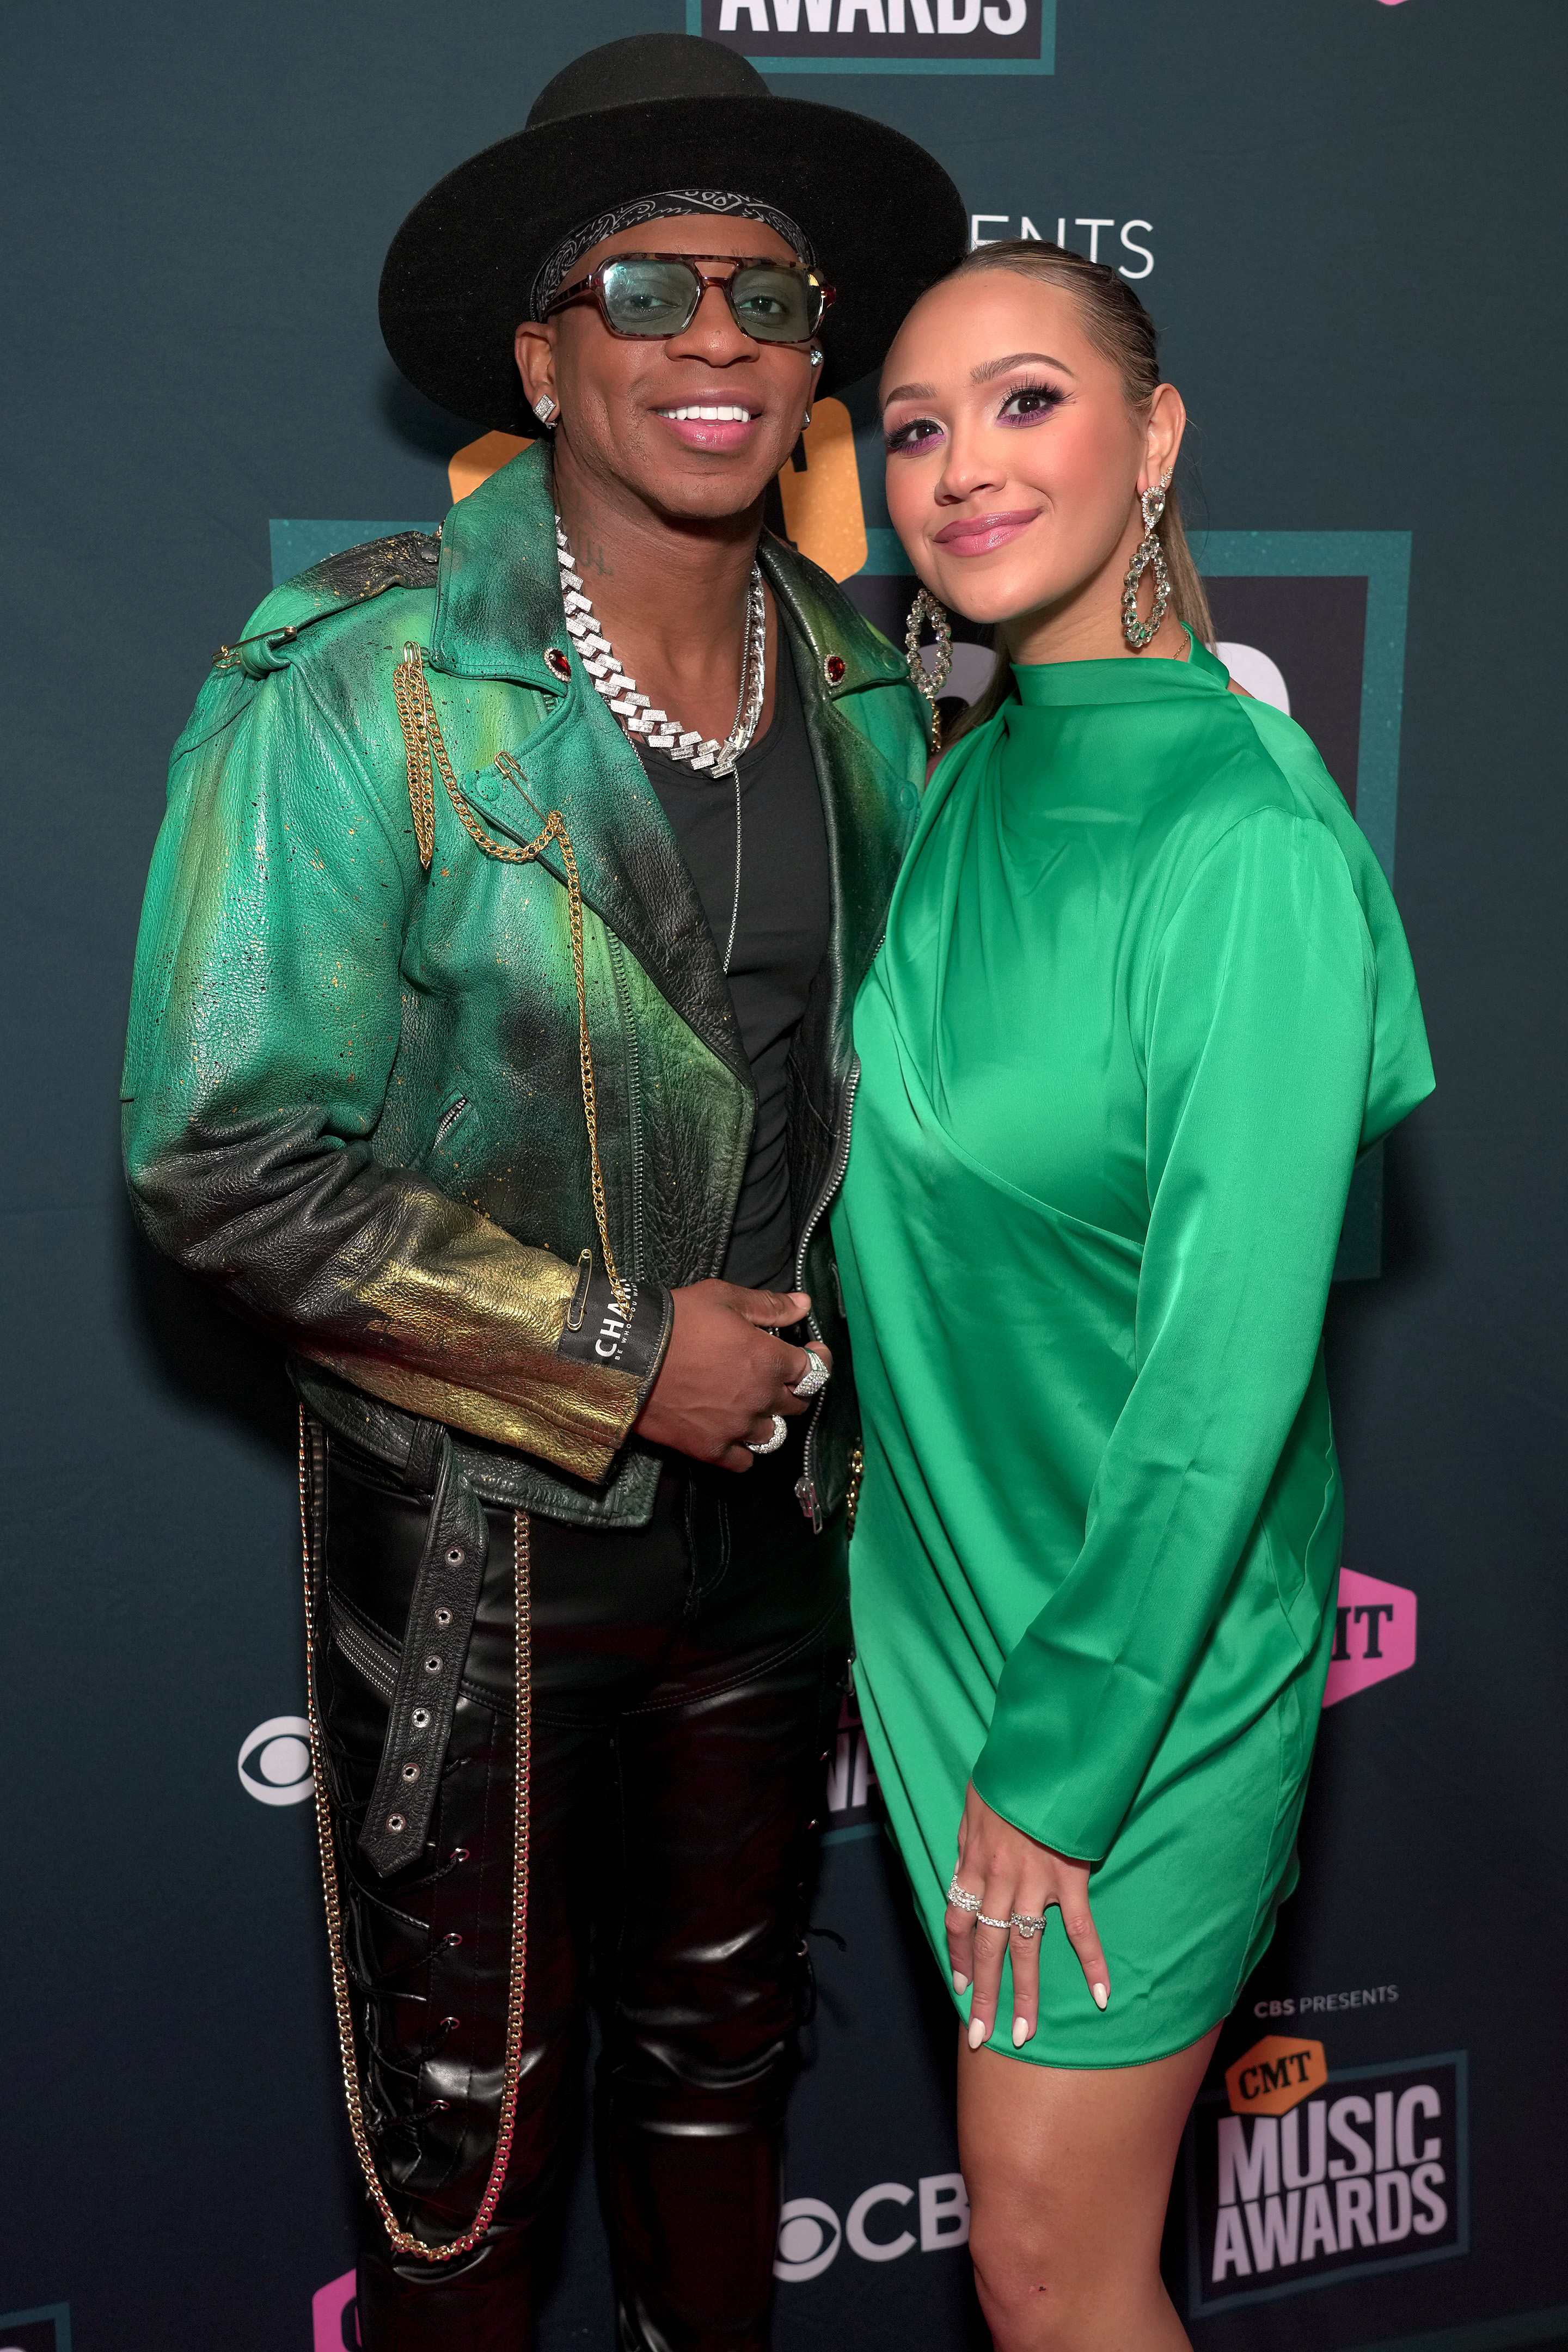 Jimmie Allen and Alexis Gale attend the 2022 CMT Music Awards at Nashville Municipal Auditorium on April 11, 2022 in Nashville, Tennessee | Source: Getty Images